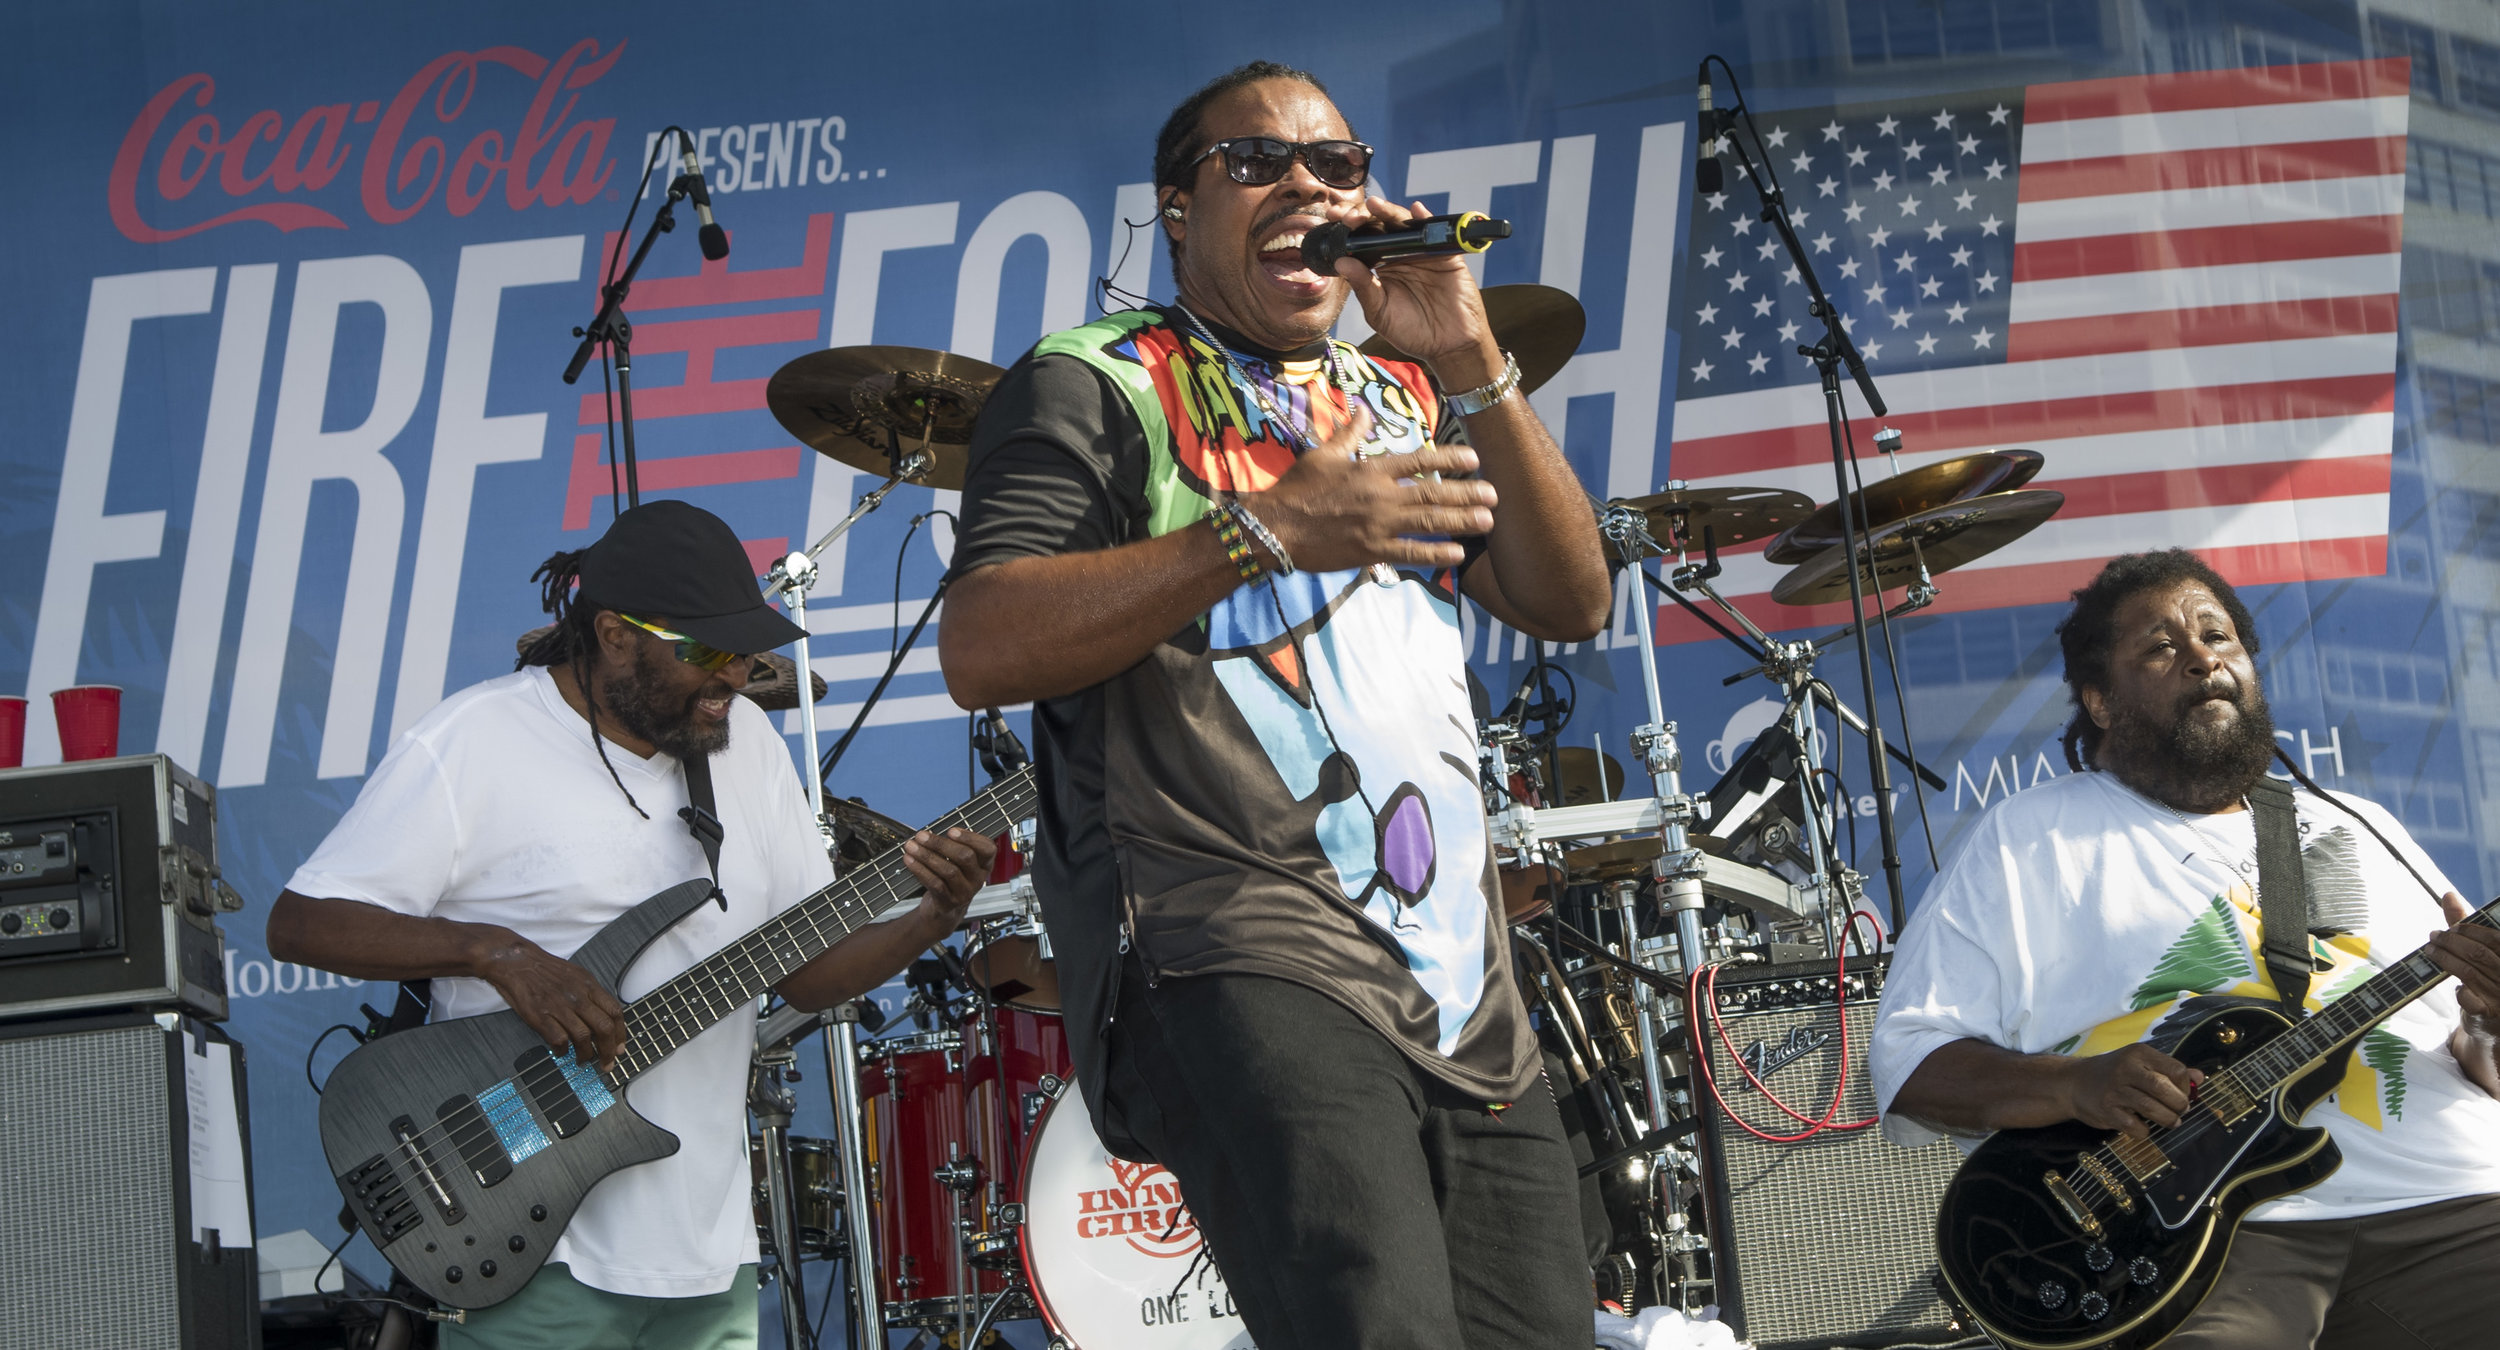 The Wailers at Fire on the Fourth 2017